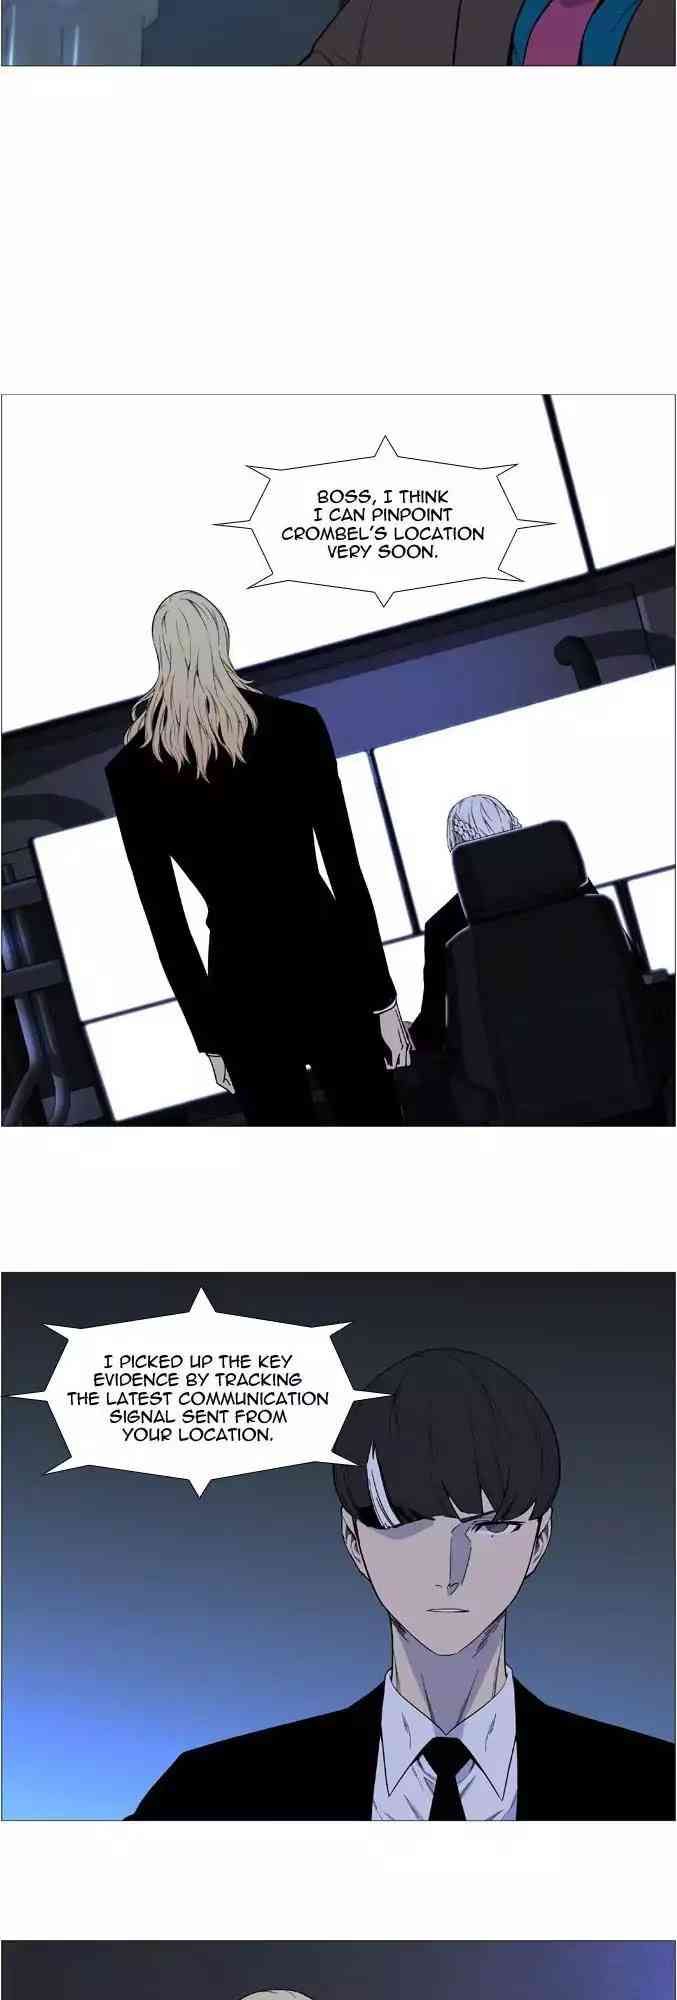 Noblesse Chapter 525_ Ep.524 page 4